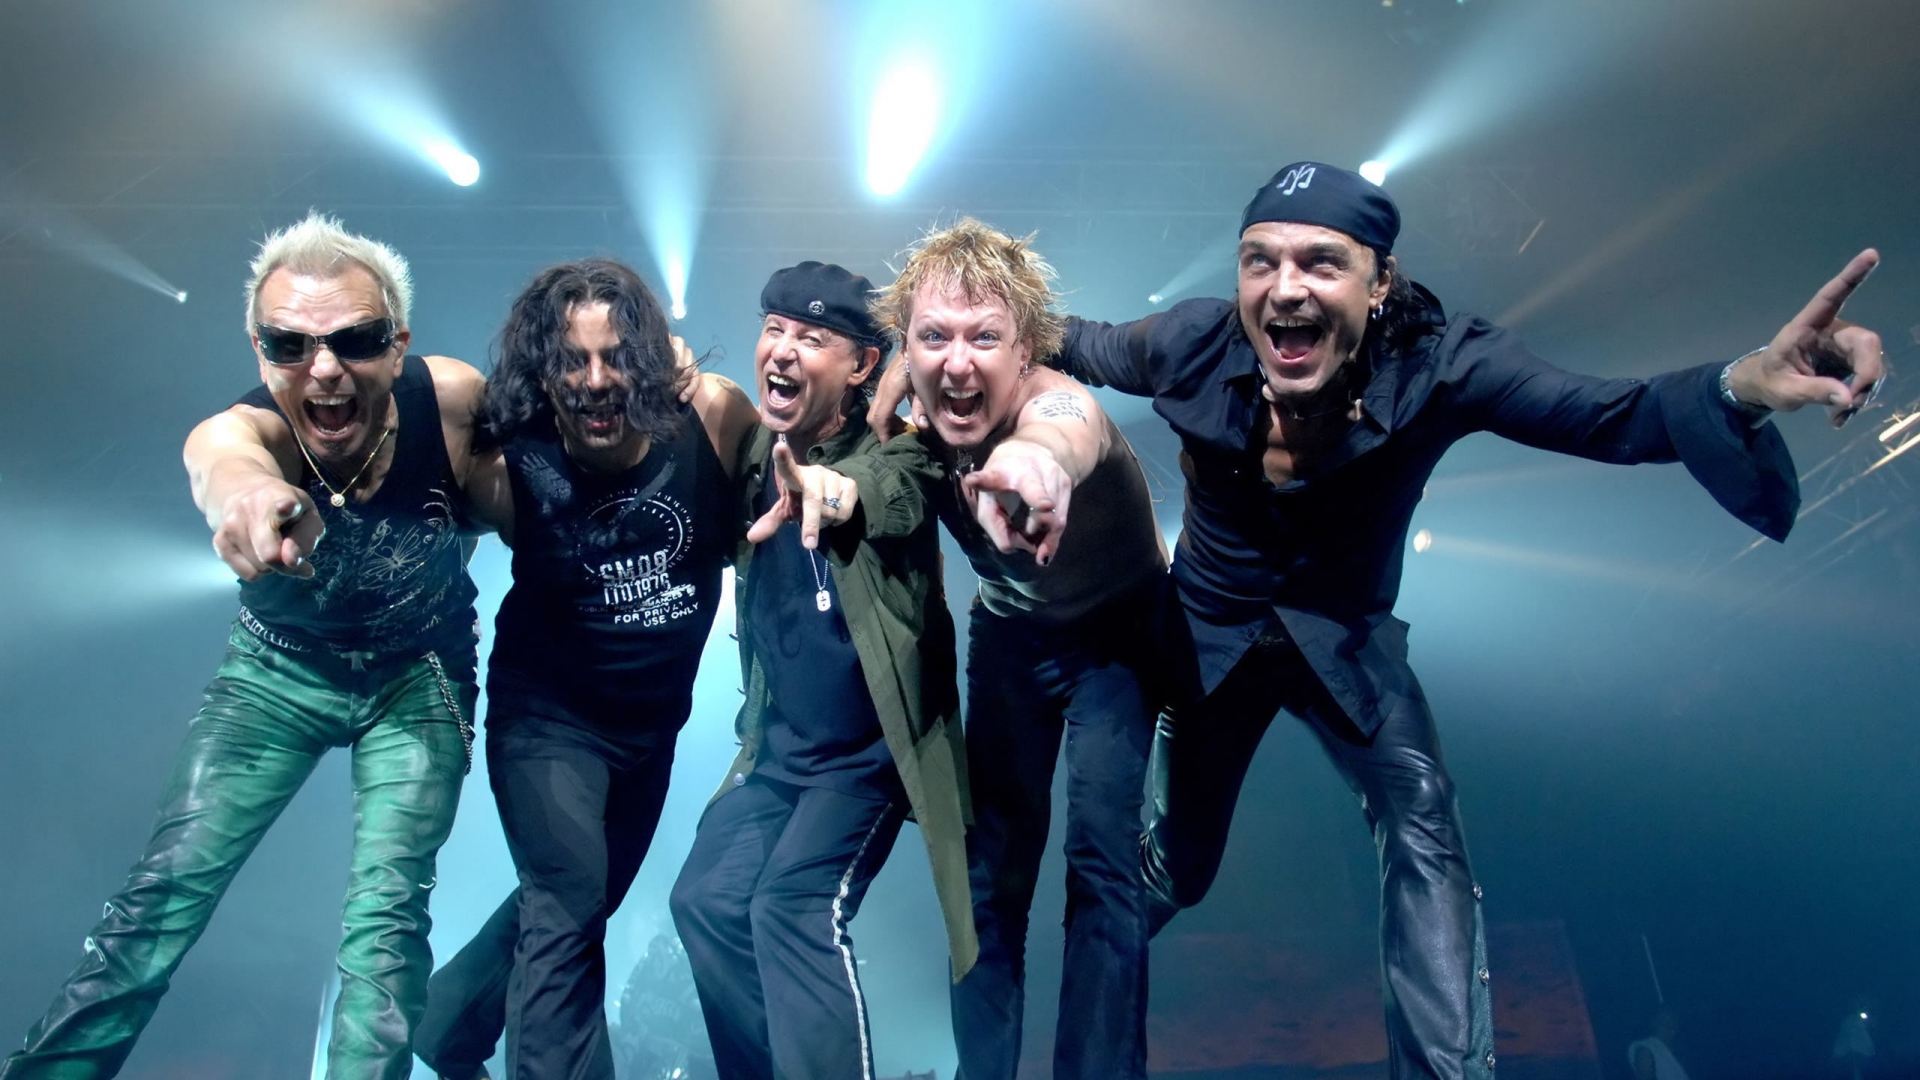 Scorpions Band Poster for 1920 x 1080 HDTV 1080p resolution